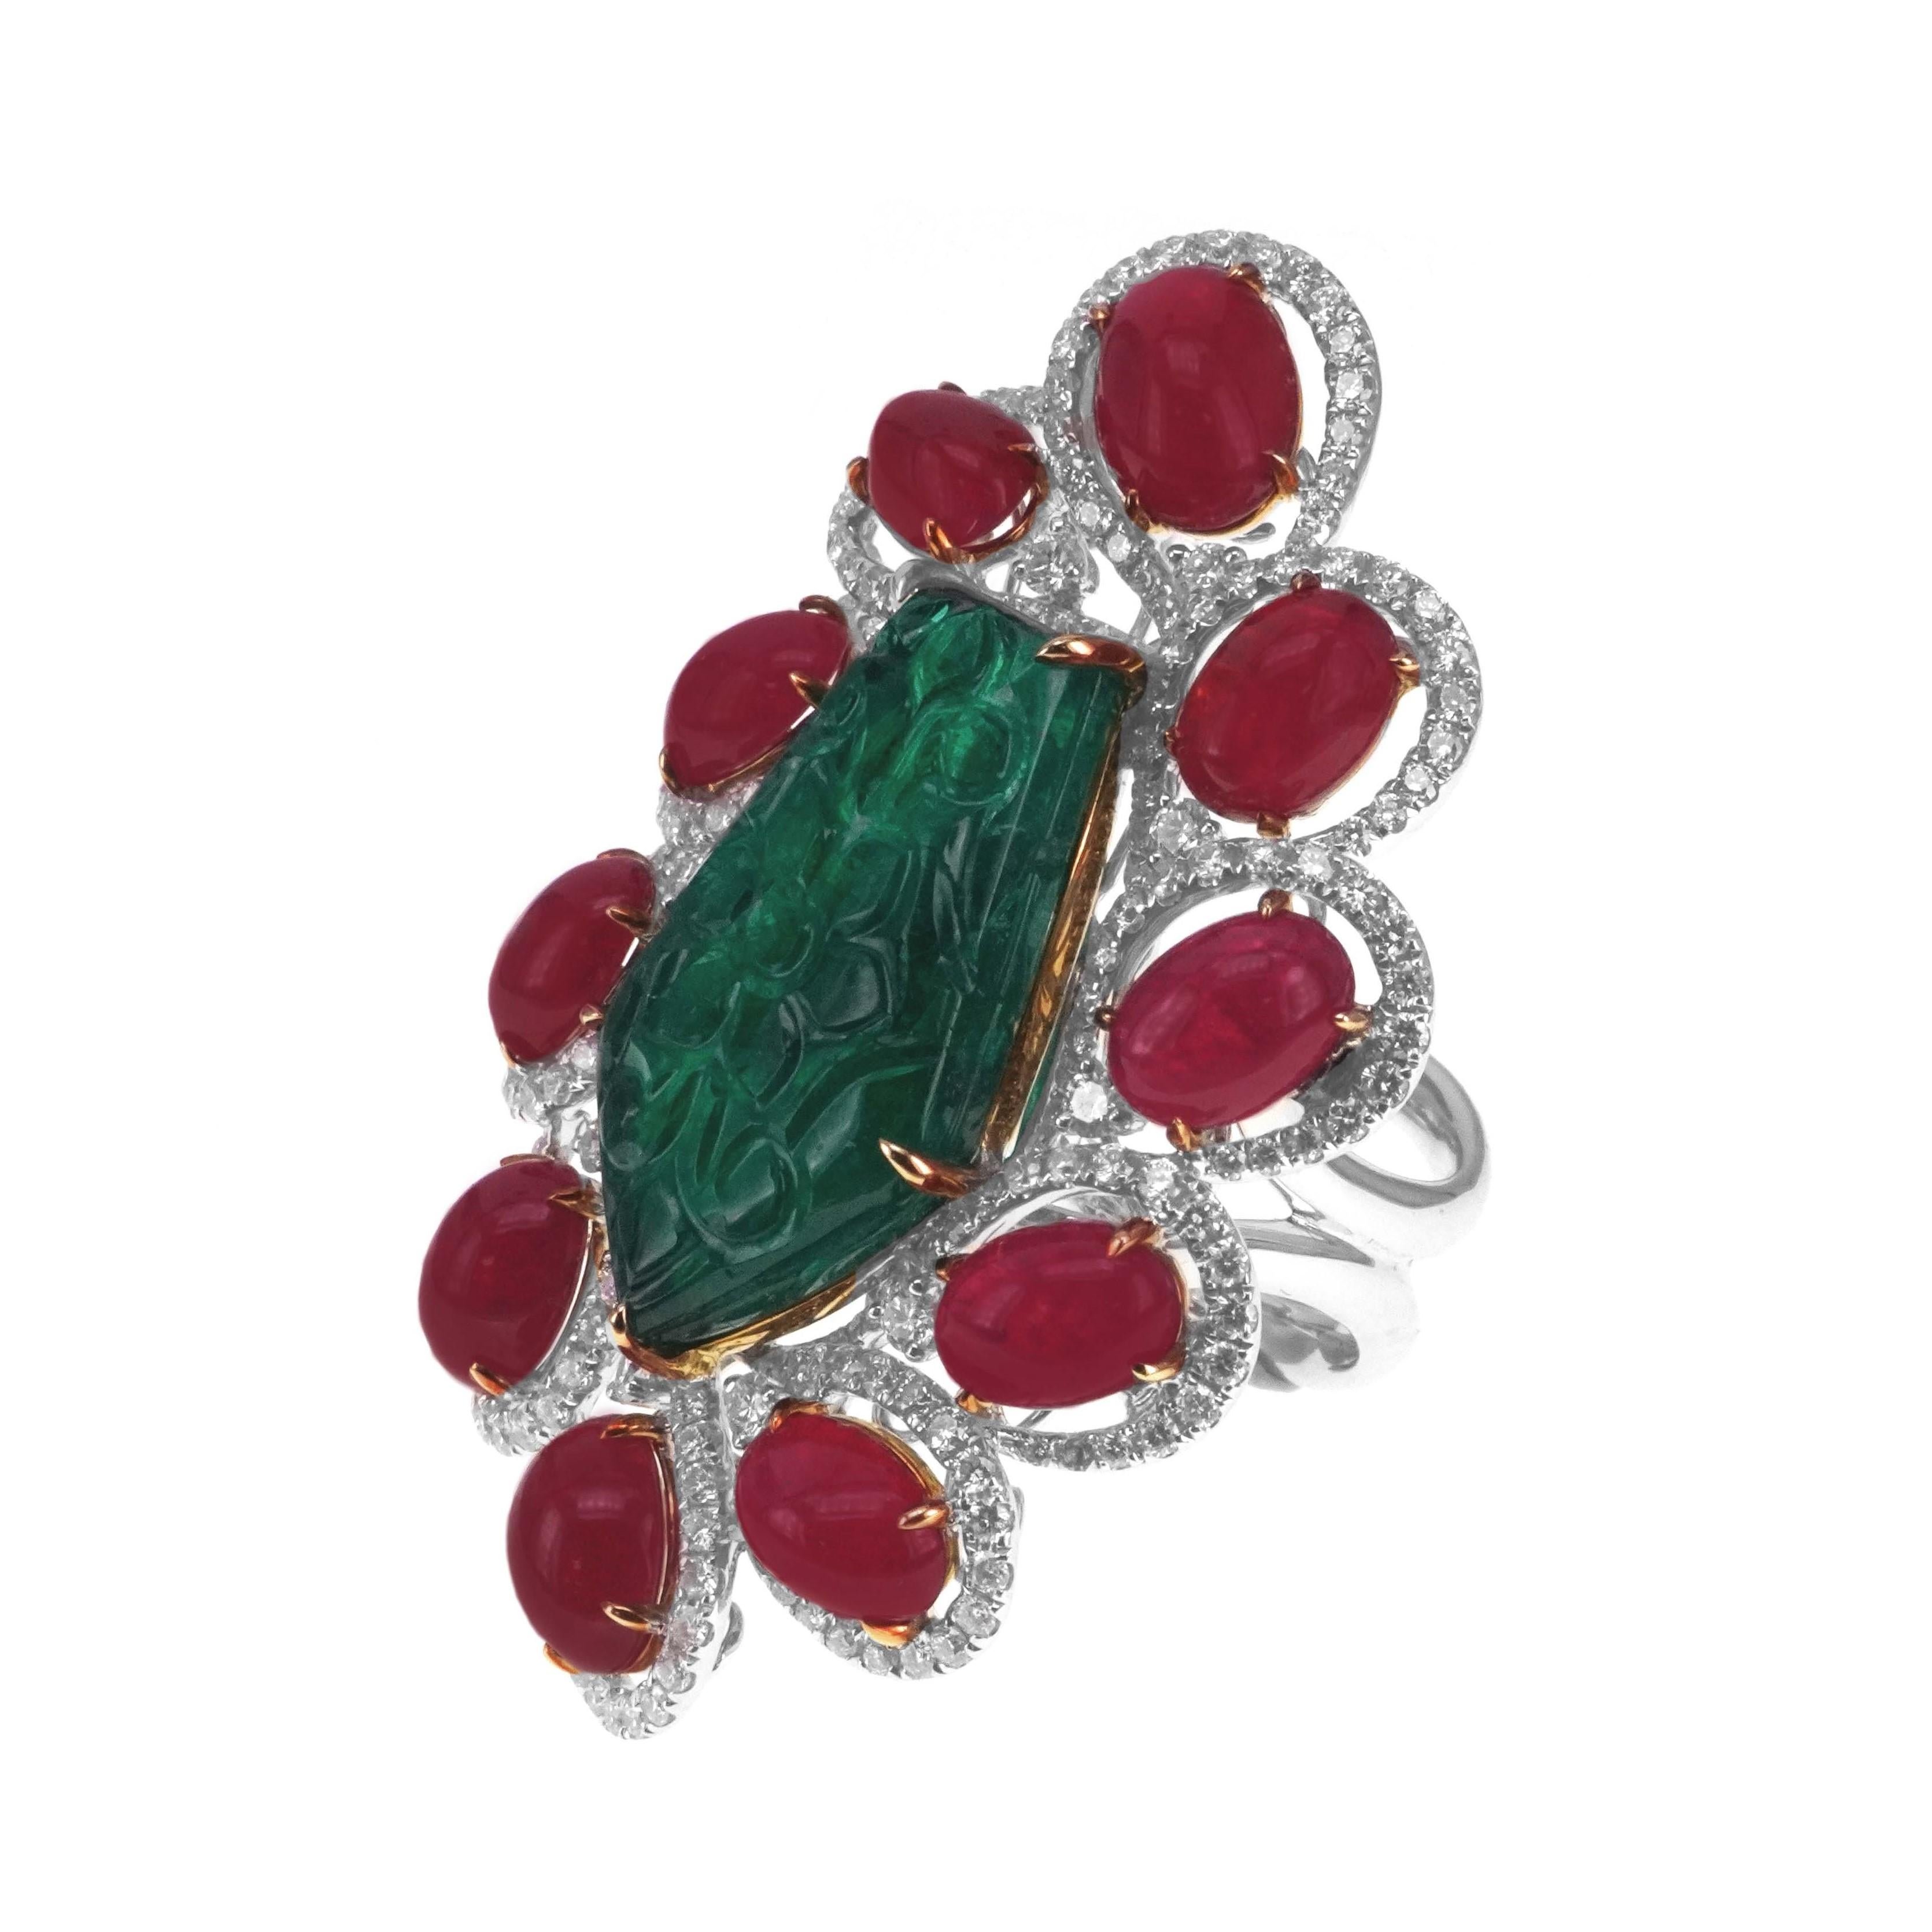 A minutely hand carved old Mughal era vivid green emerald weighing 11 carat is set along with 16 carat of vivid red ruby in this gorgeous looking antique ring. A total of 1.60 carat of white brilliant round diamond are set in this ring. The details